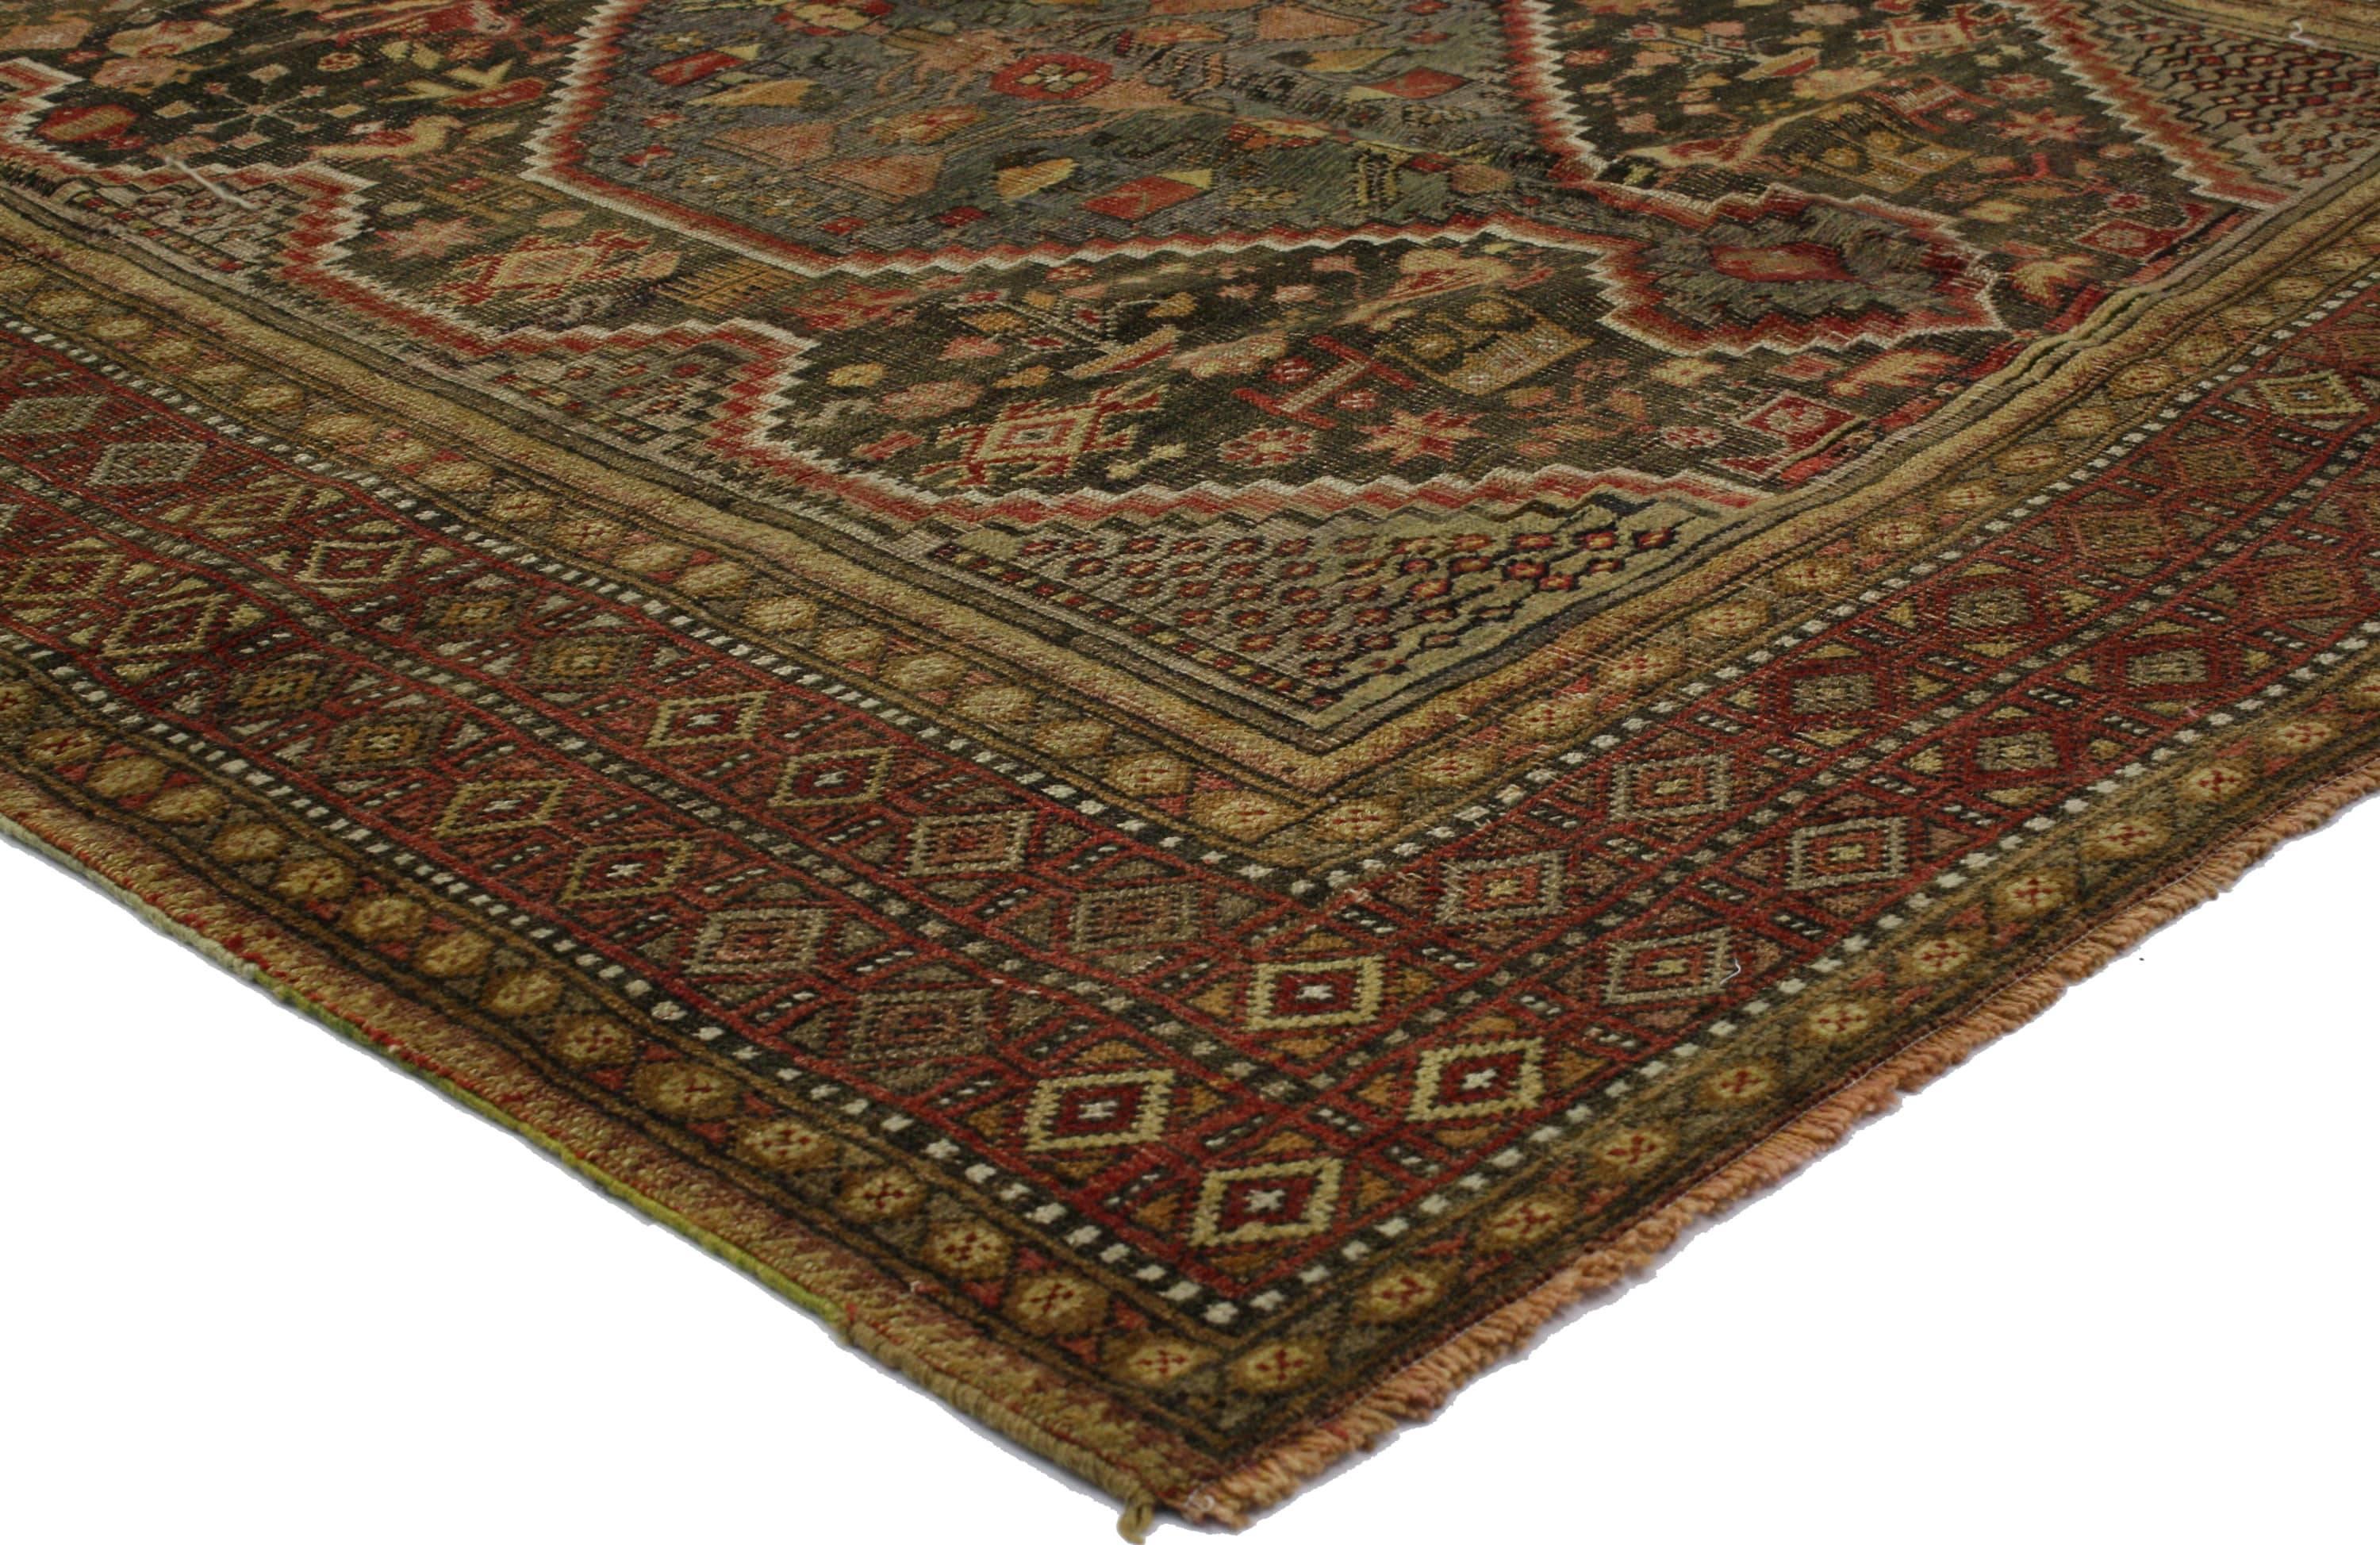 51558 Distressed Antique Persian Shiraz rug with Rustic Tribal style. This hand knotted wool distressed antique Persian Shiraz rug features a stepped pole medallion with anchor pendants floating on an abrashed field. The field is scattered with a